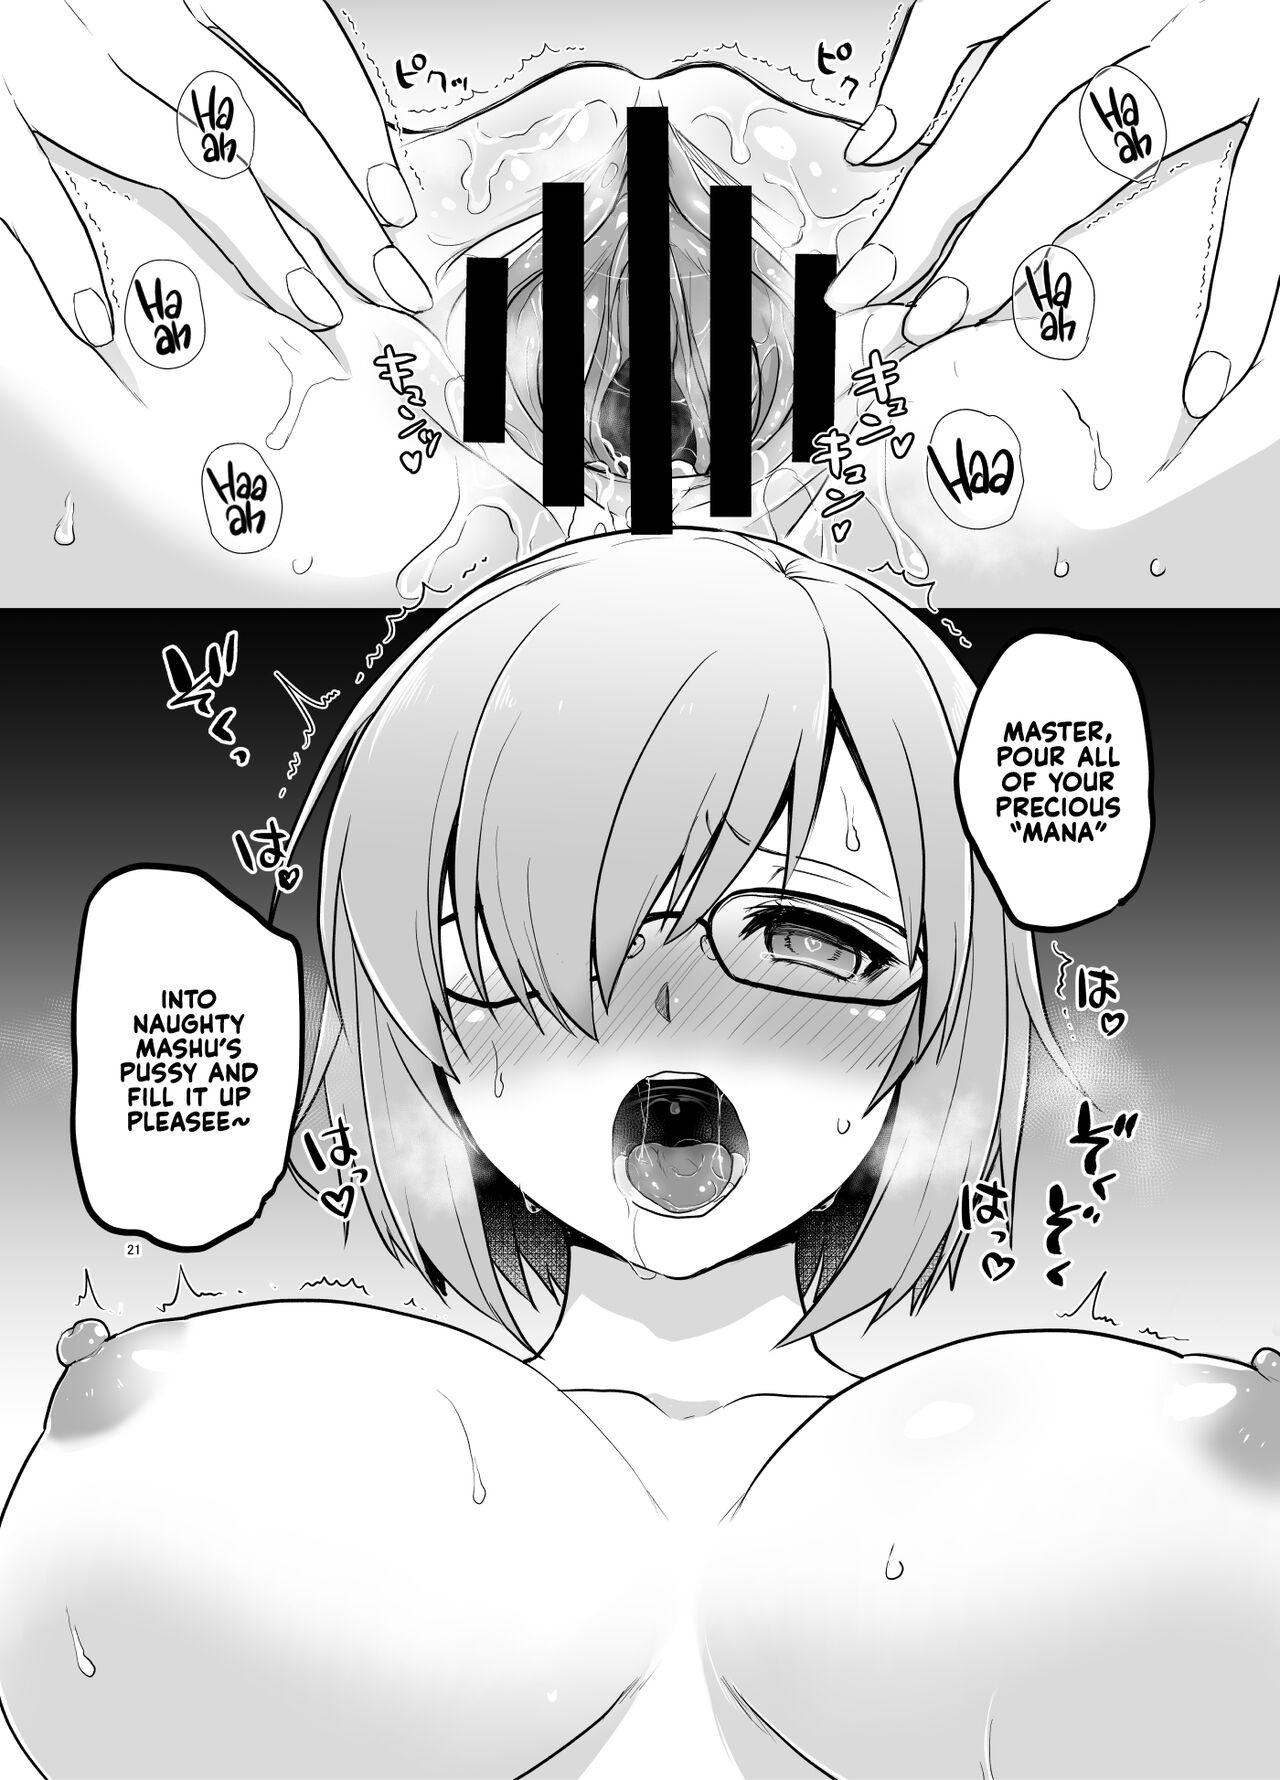 Mashu Must Deal with this Pushy n' Lusty Oji-san Whenever Senpai is Busy Rayshifting! 19